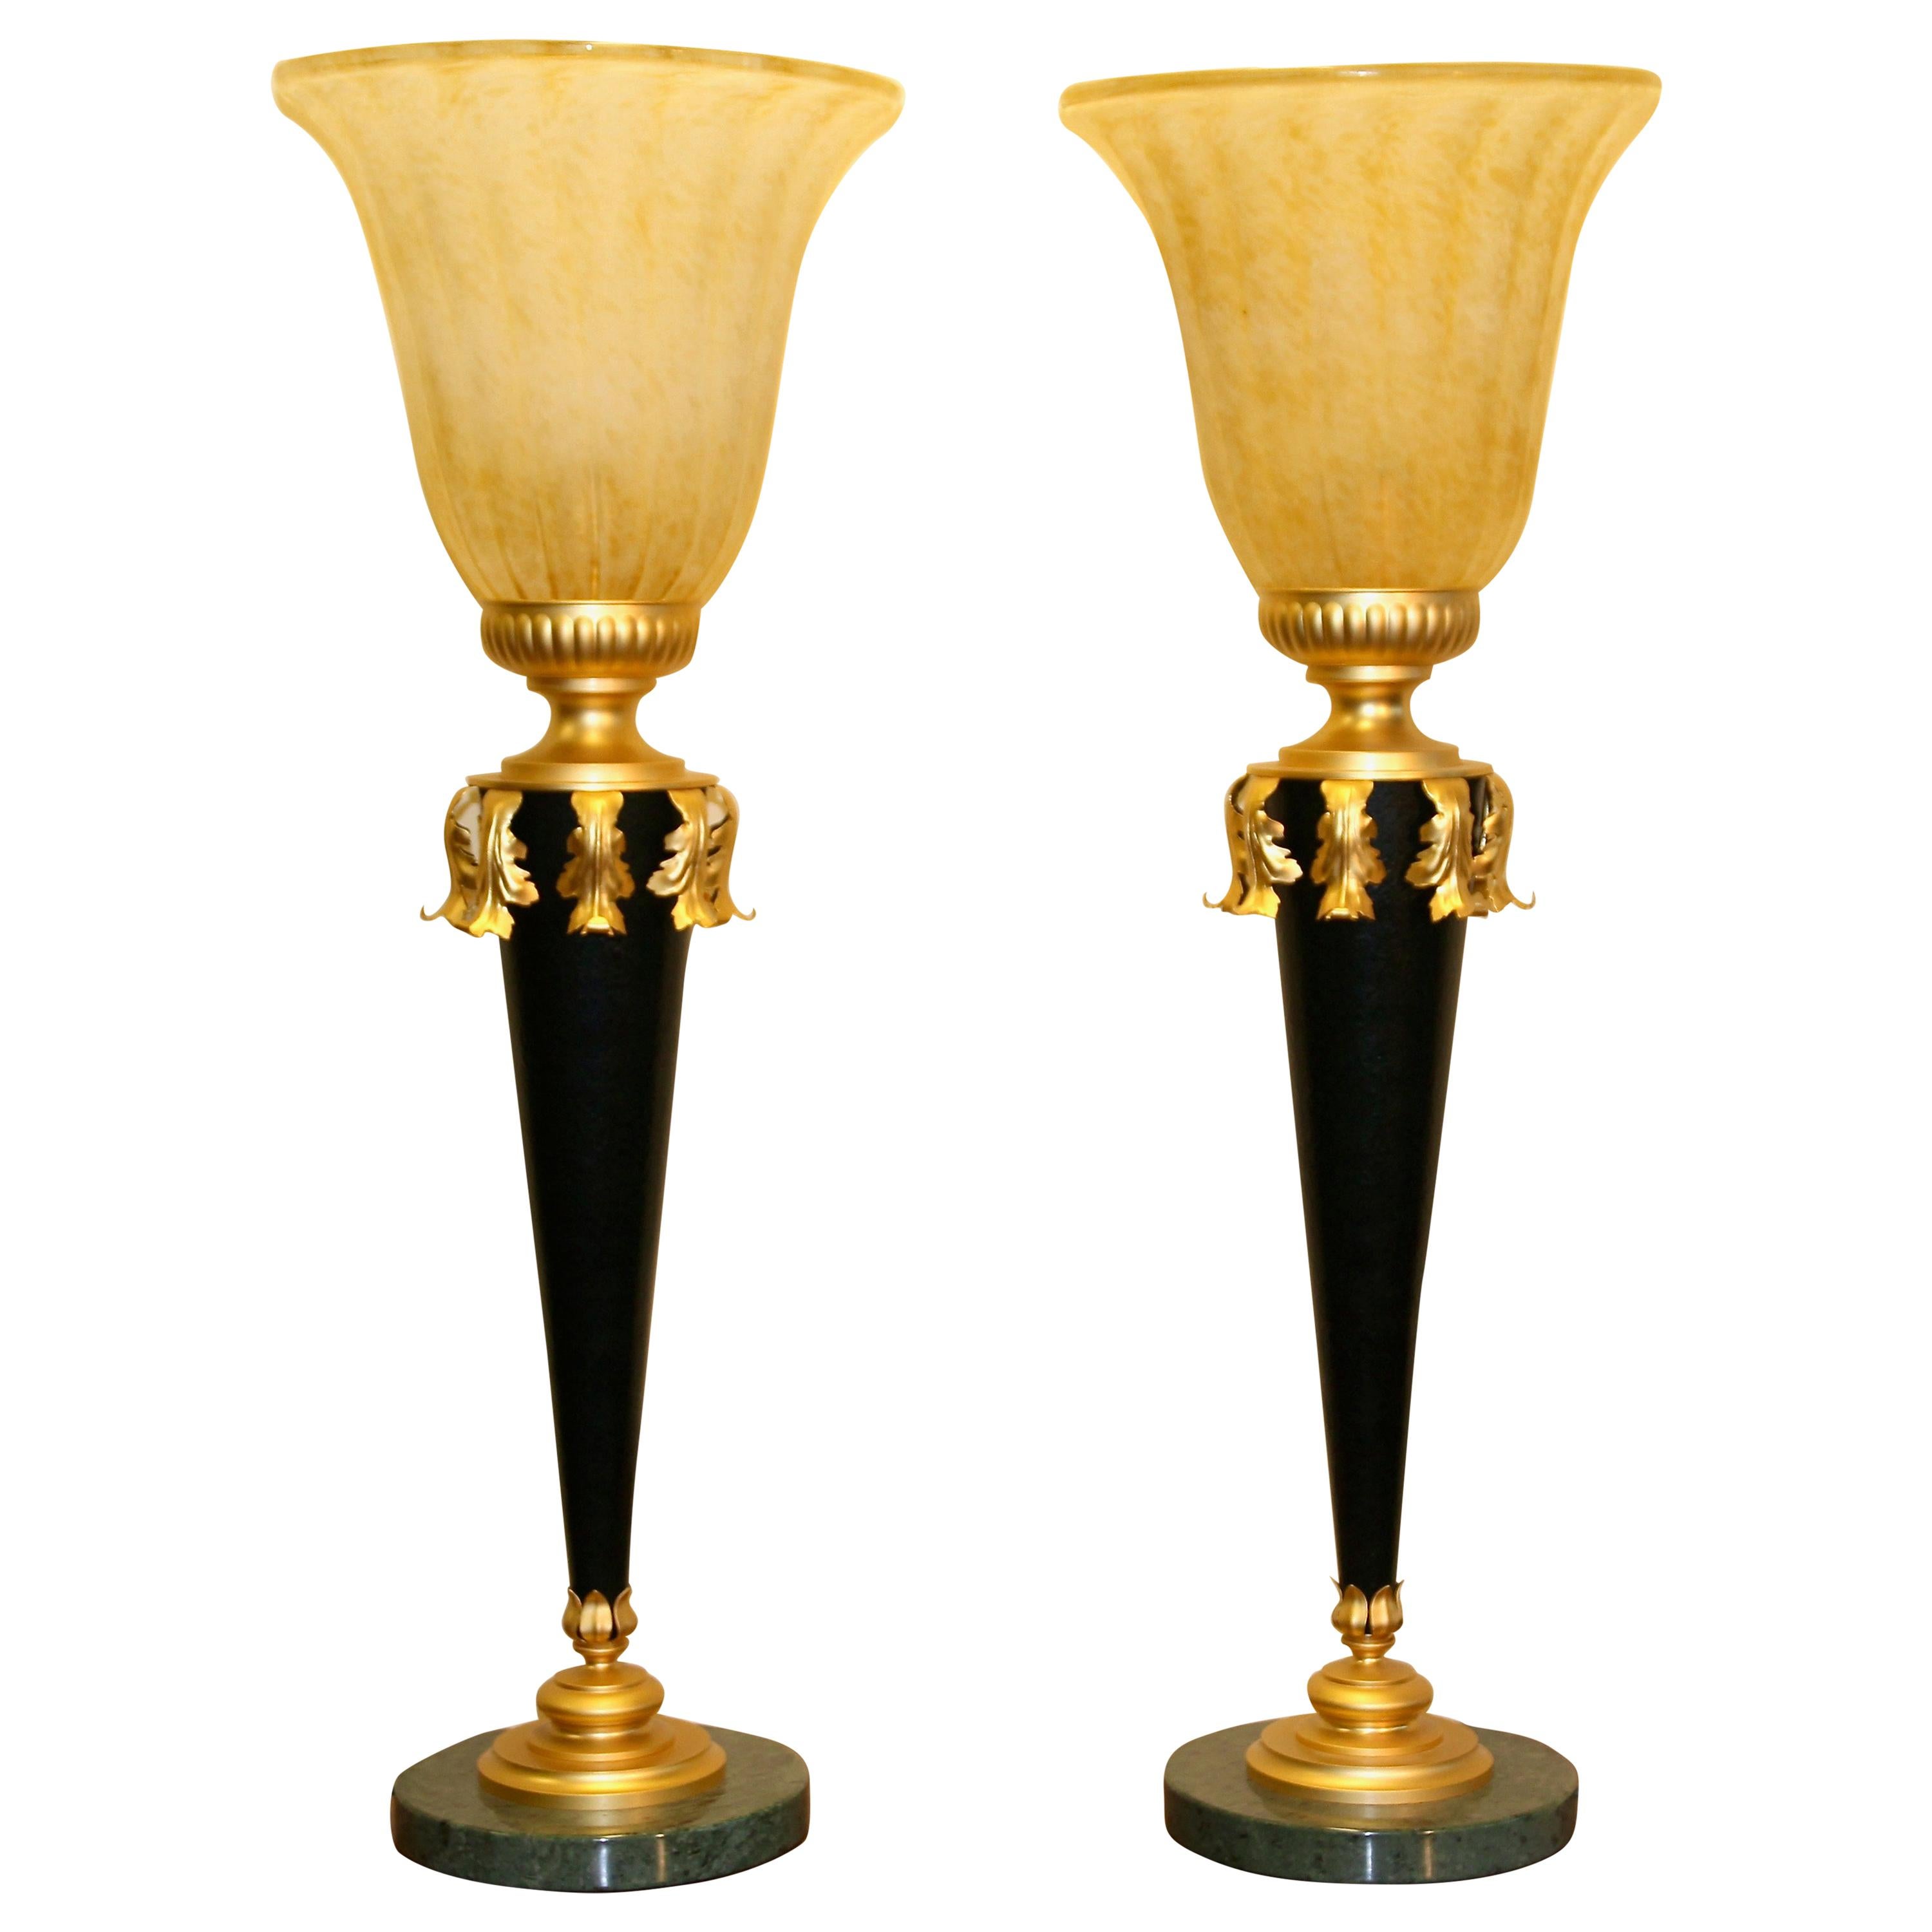 Pair of Decorative, Table, Desk Lamps, 20th Century, Antique Style